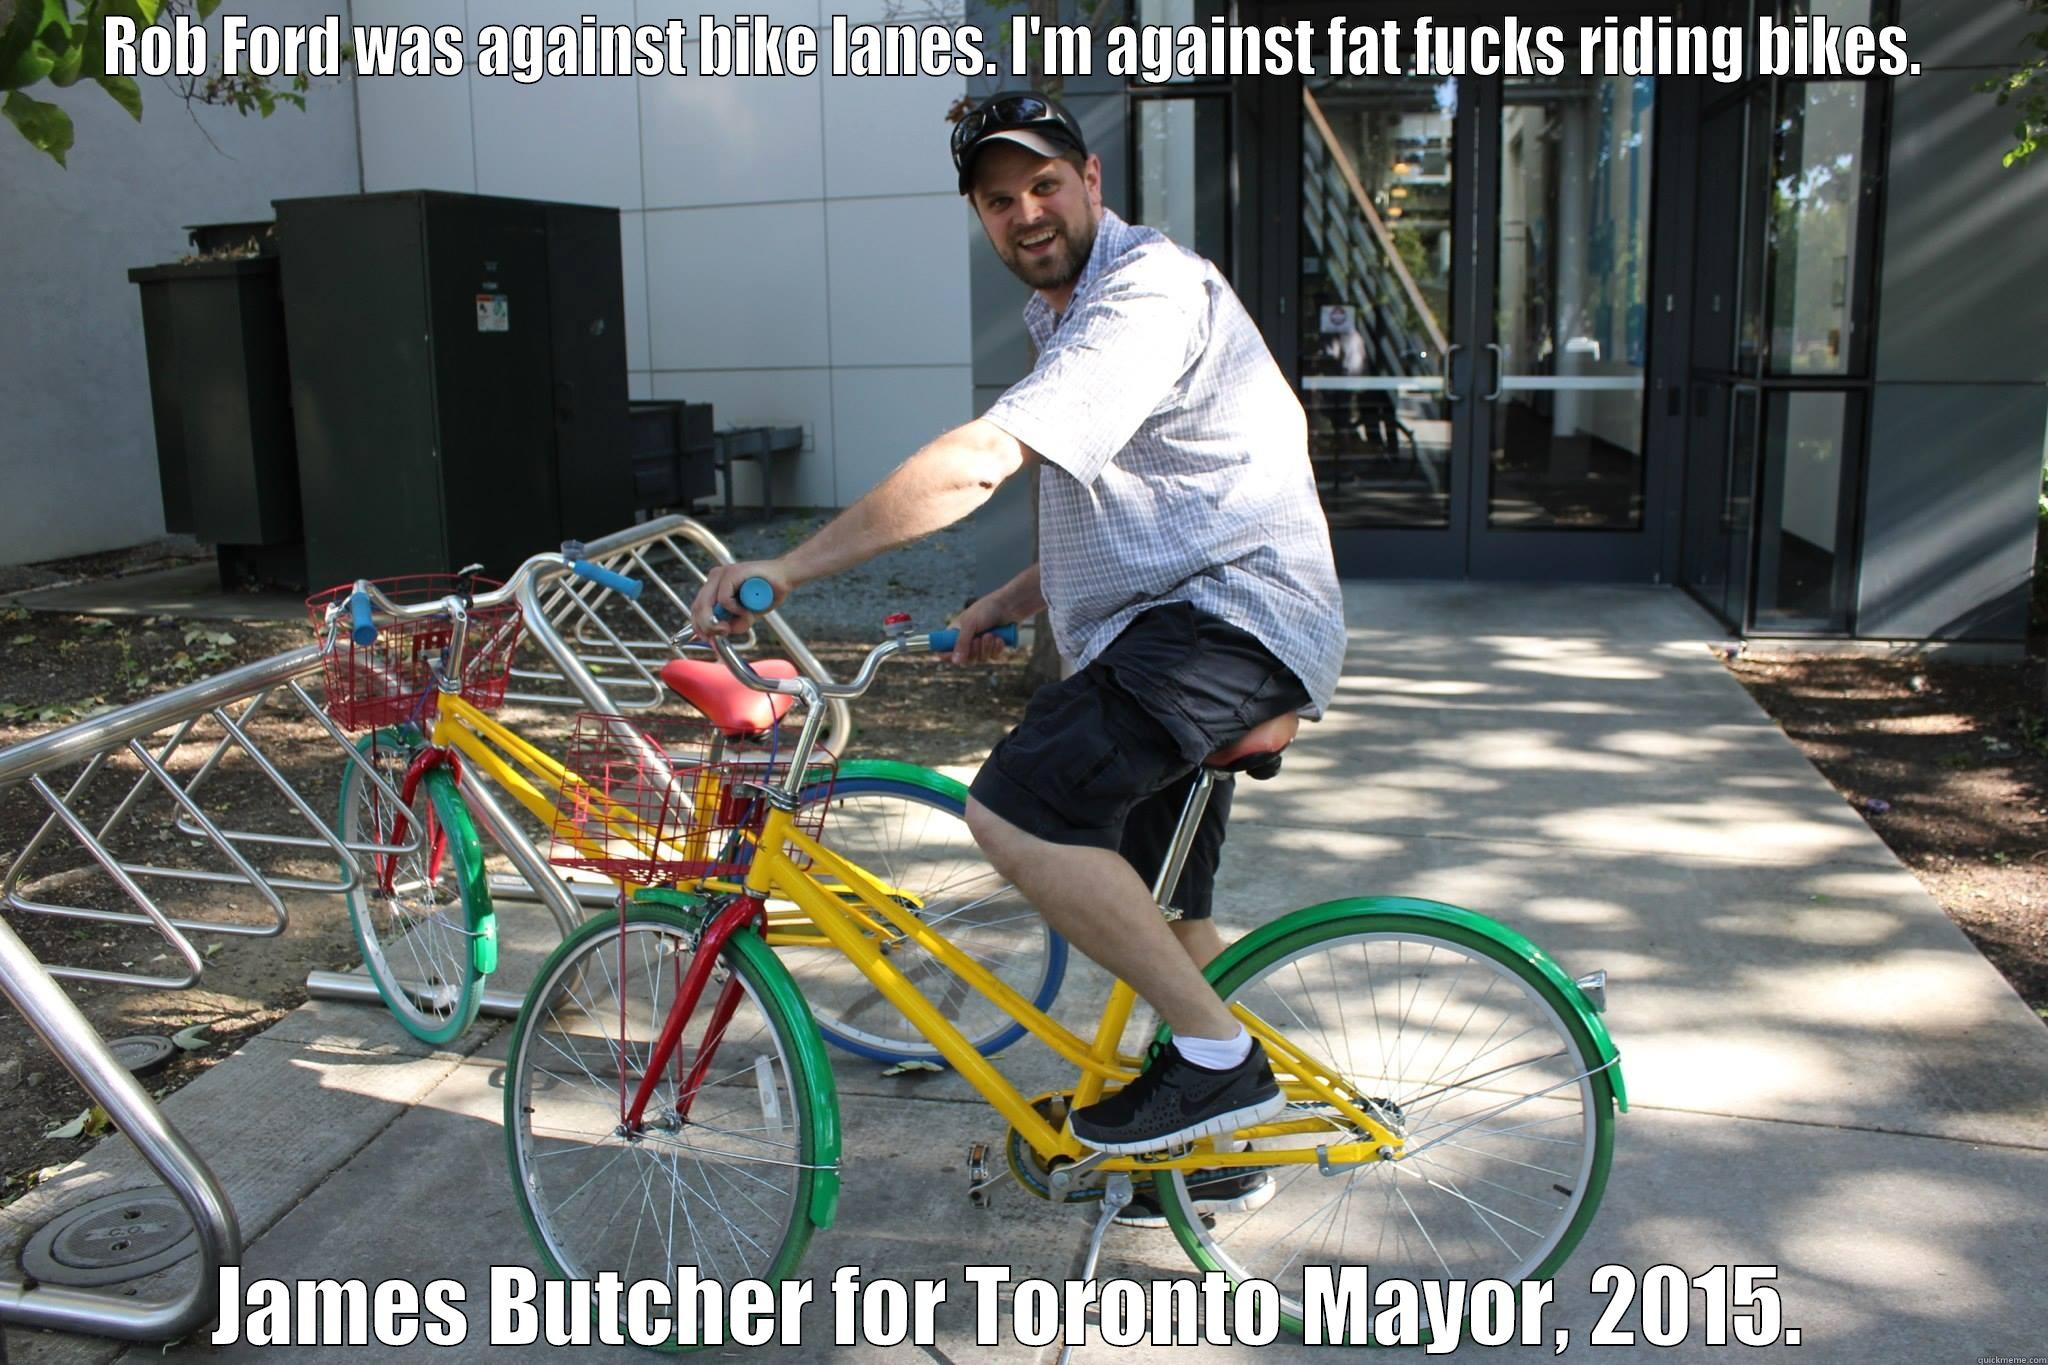 Campaign ad.  - ROB FORD WAS AGAINST BIKE LANES. I'M AGAINST FAT FUCKS RIDING BIKES.  JAMES BUTCHER FOR TORONTO MAYOR, 2015.  Misc